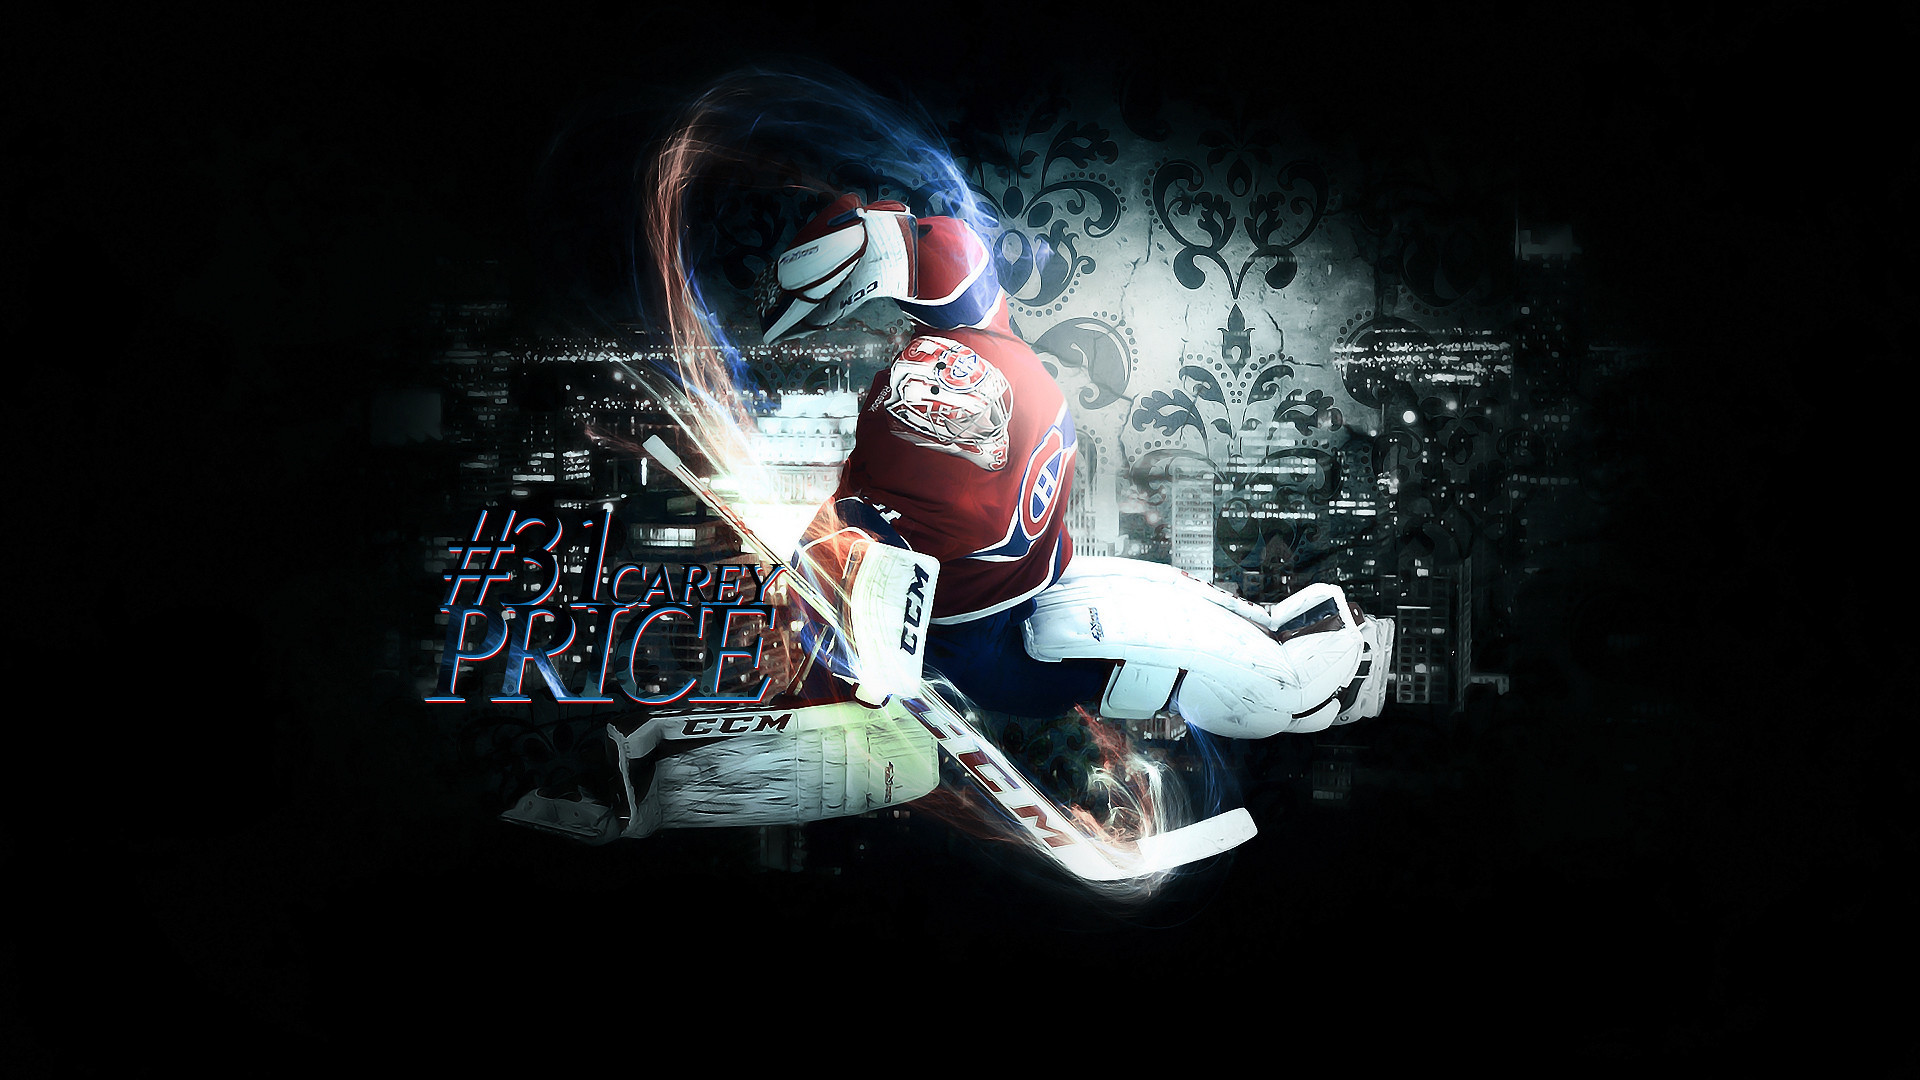 1920x1080 Stoked for season I made this Carey Price Wallpaper ...